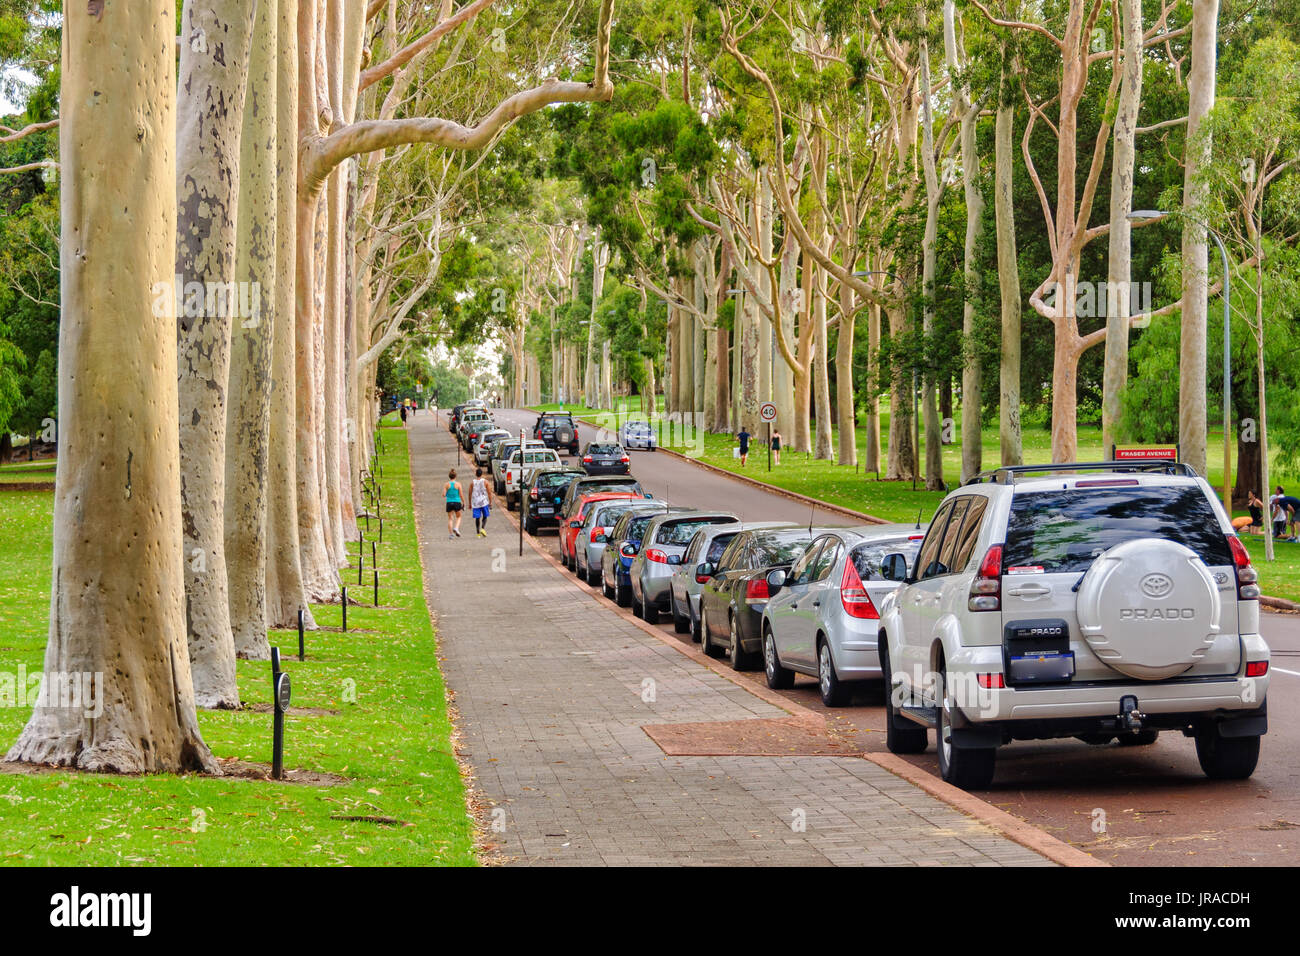 Magnificent eucalypts (red-flowering gum trees) along Fraser Avenue in Kings Park - Perth, WA, Australia Stock Photo